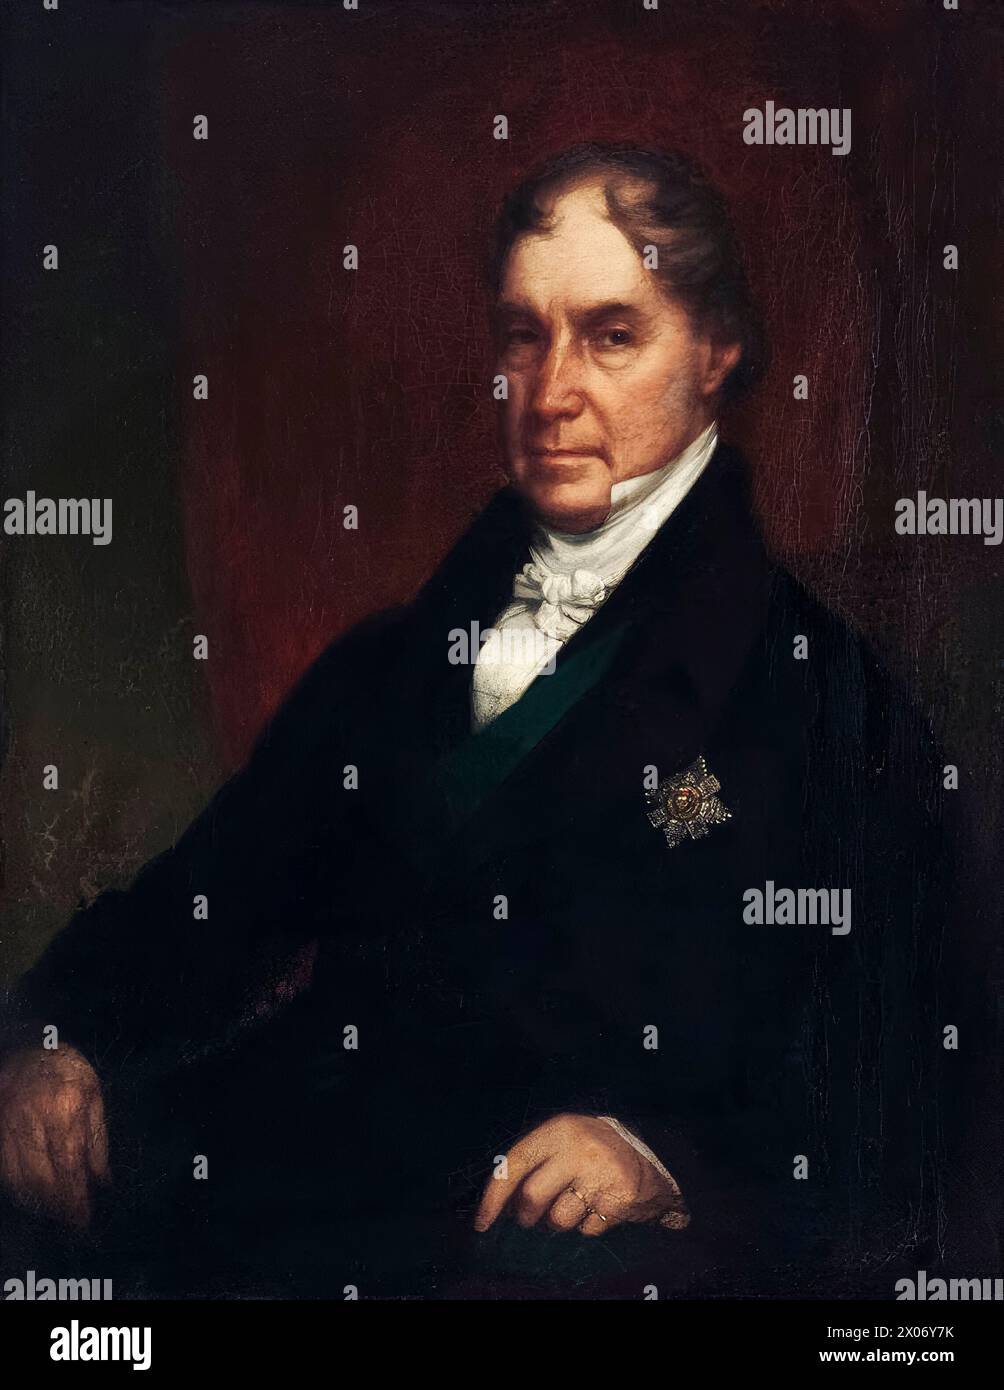 George Hamilton-Gordon, 4th Earl of Aberdeen (1784-1860), styled 'Lord Haddo', Prime Minister of the United Kingdom 1852-1855, portrait painting in oil on canvas by Chester Harding, circa 1847 Stock Photo